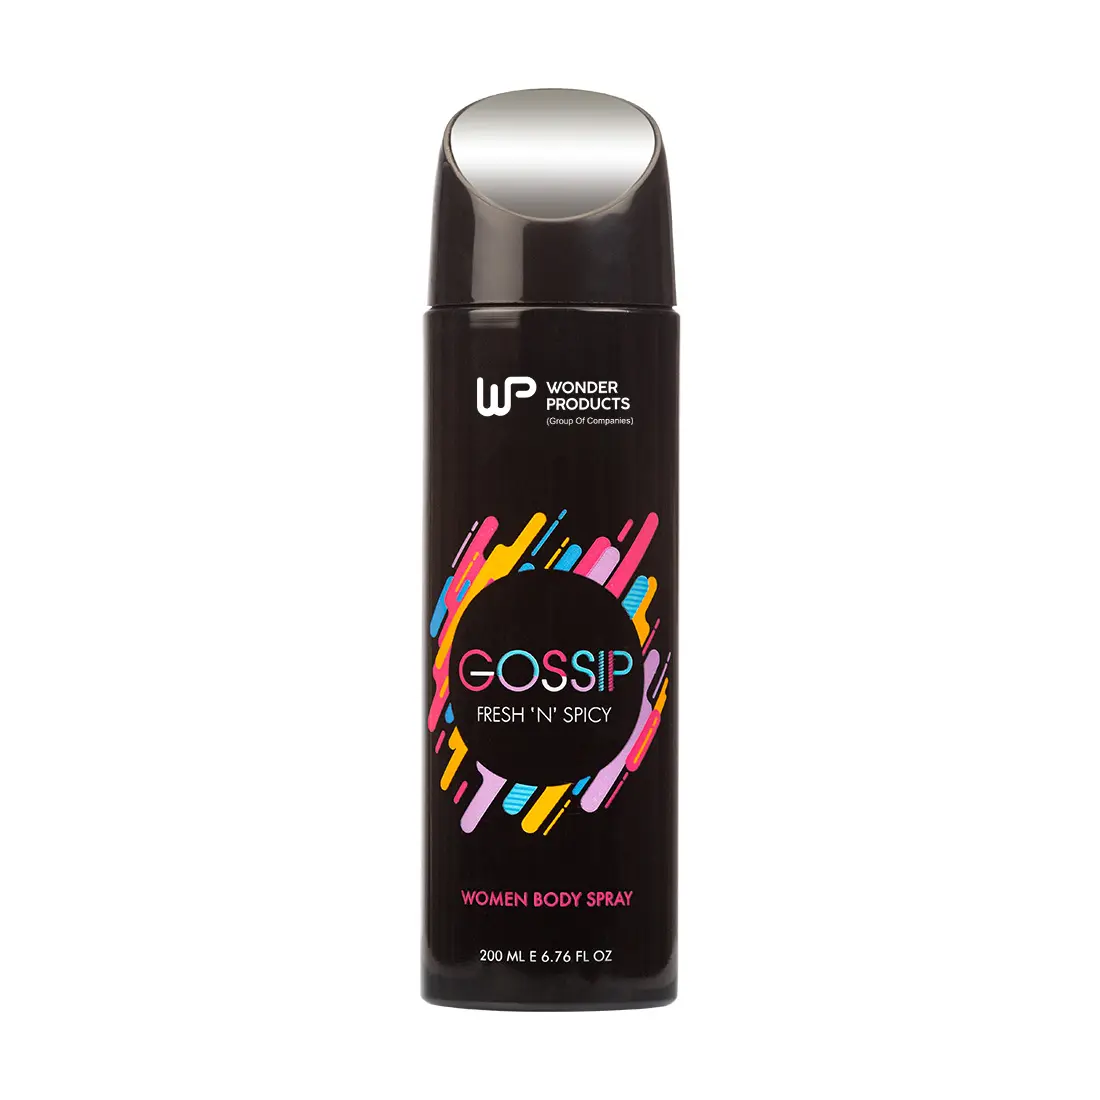 OEM/ODM Gossip Deodorant for Women Body Spray available with private label and customized logo